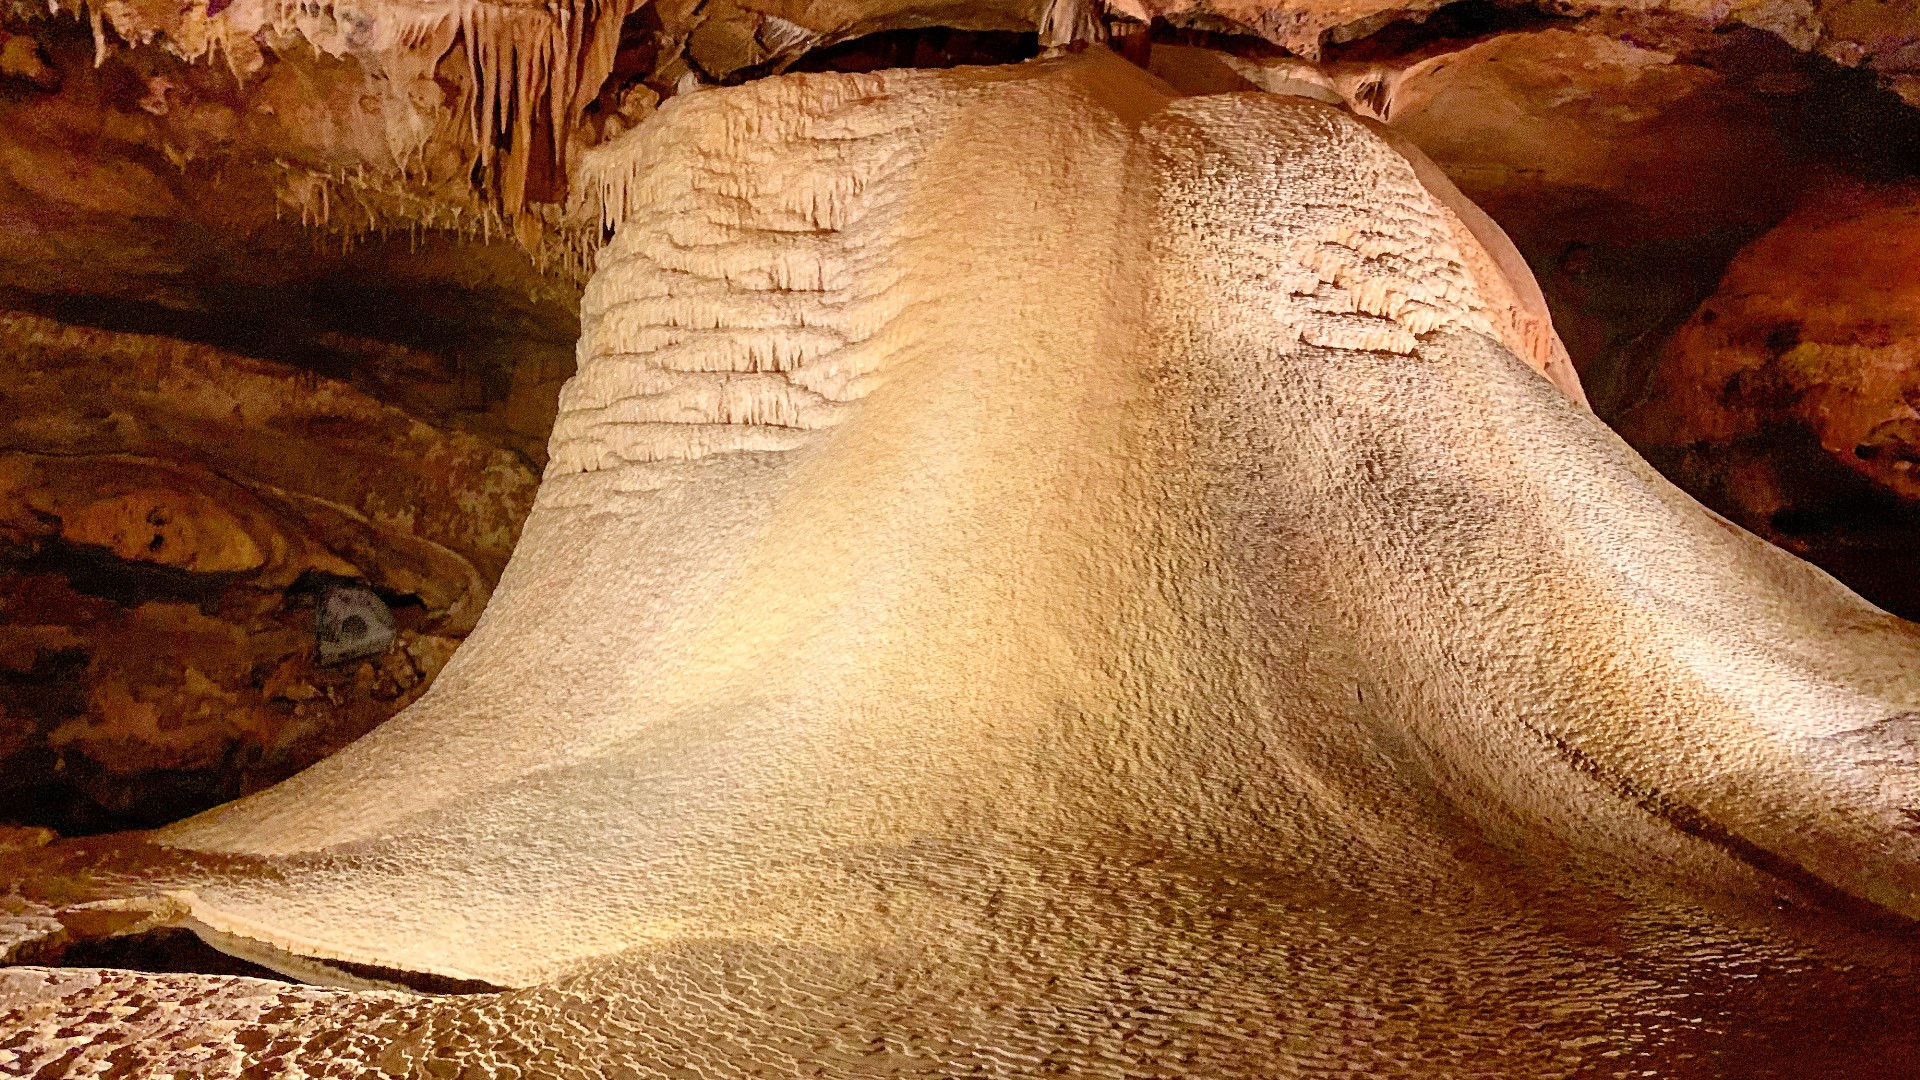 Inner Space Cavern in Georgetown is a Central Texas destination full of natural beauty and history.